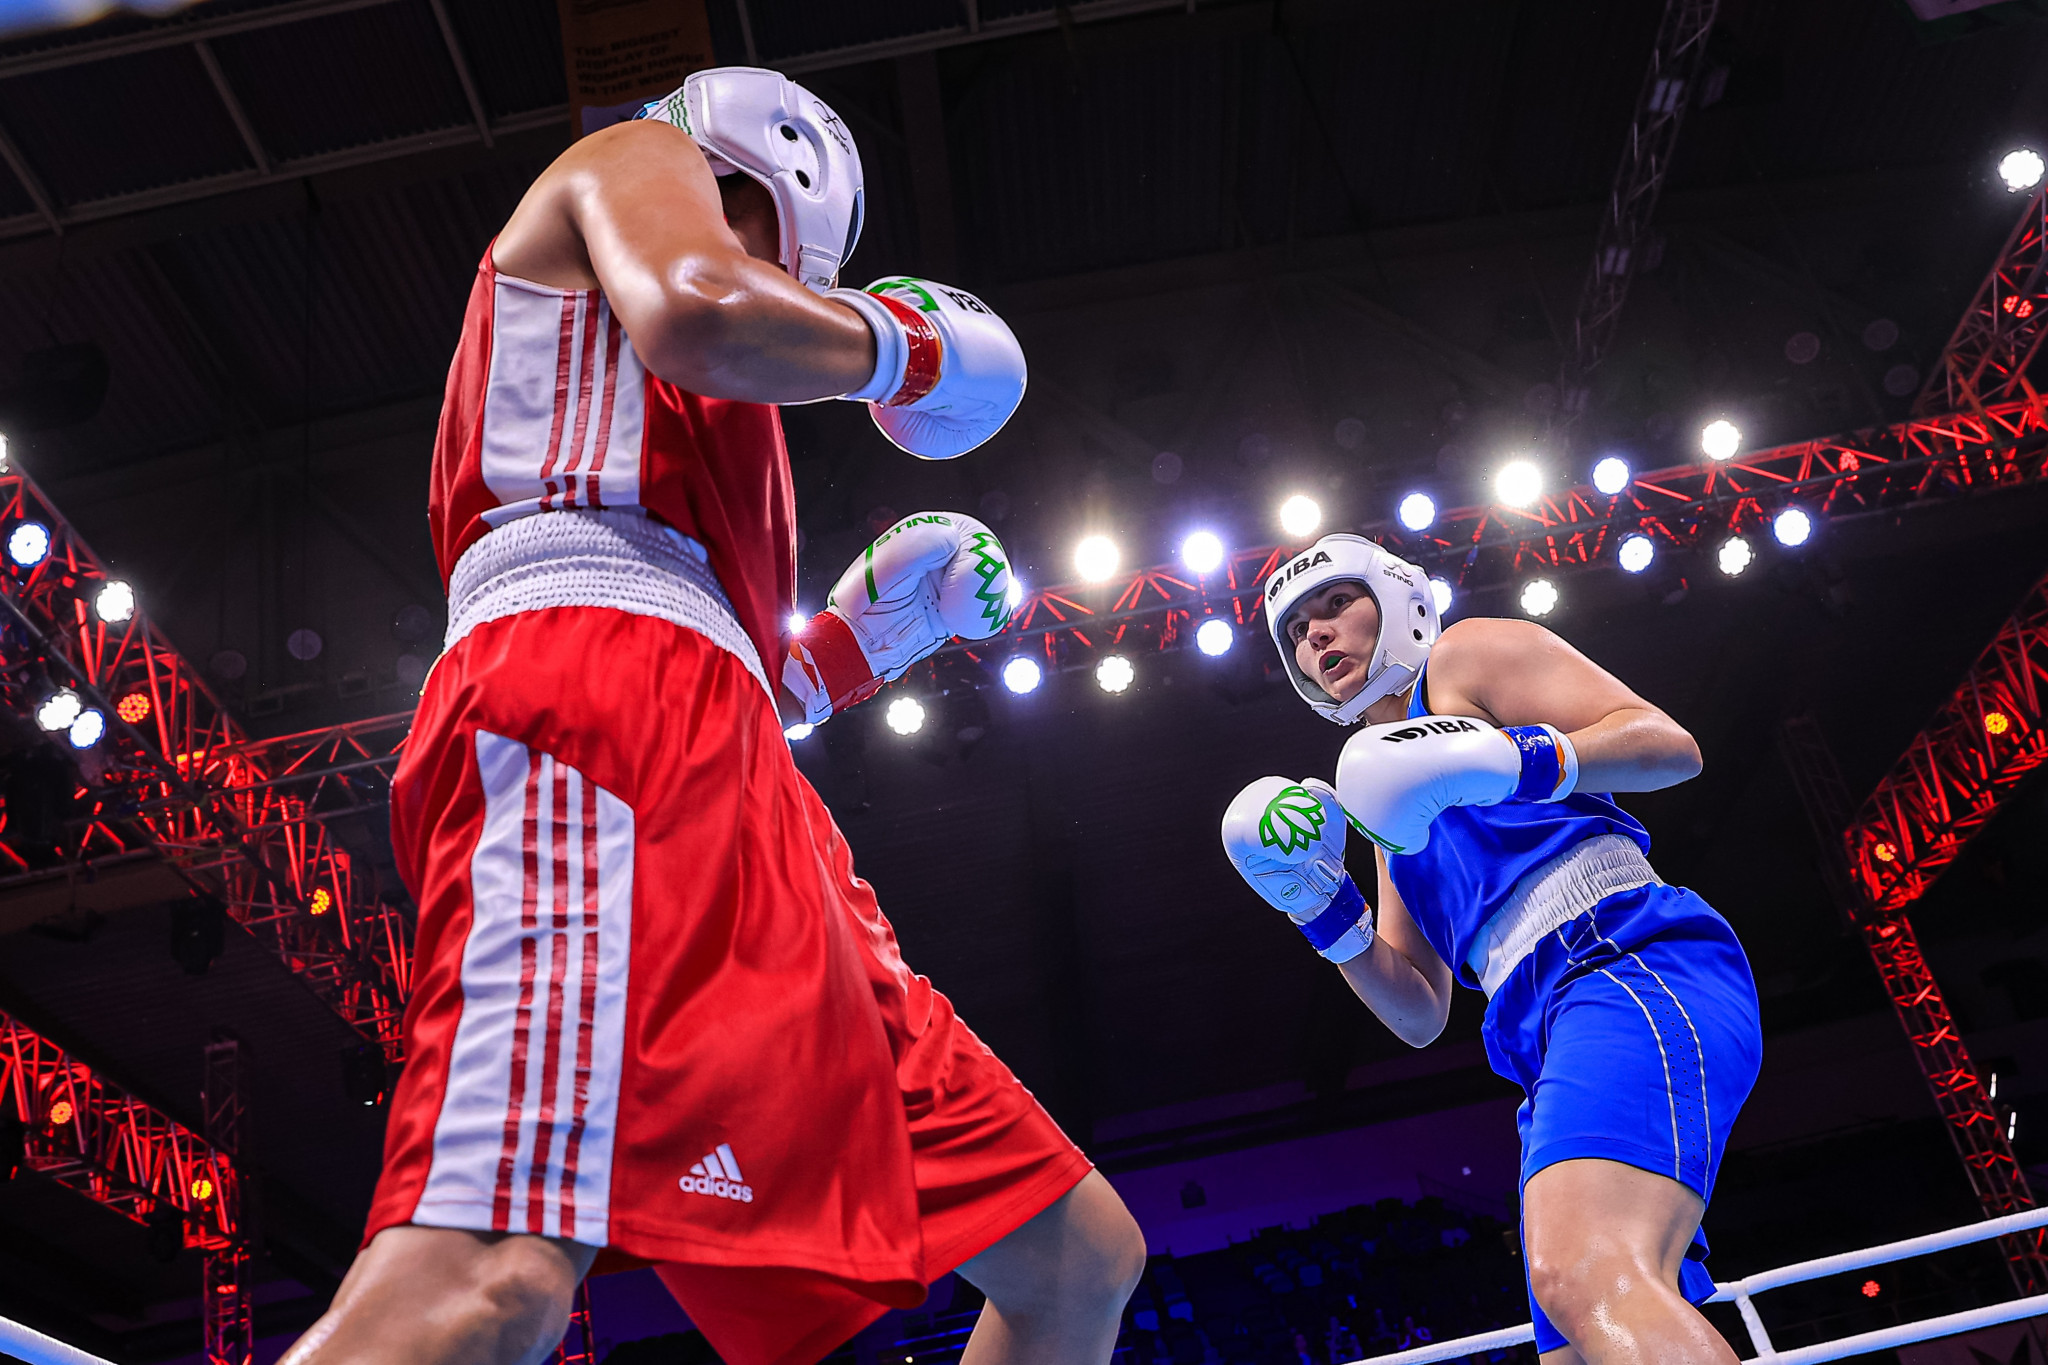 Kazakhstan ensured six medals including one for Valentina Khalzova who beat Elif Guneri of Turkey in a middleweight quarter-final ©IBA